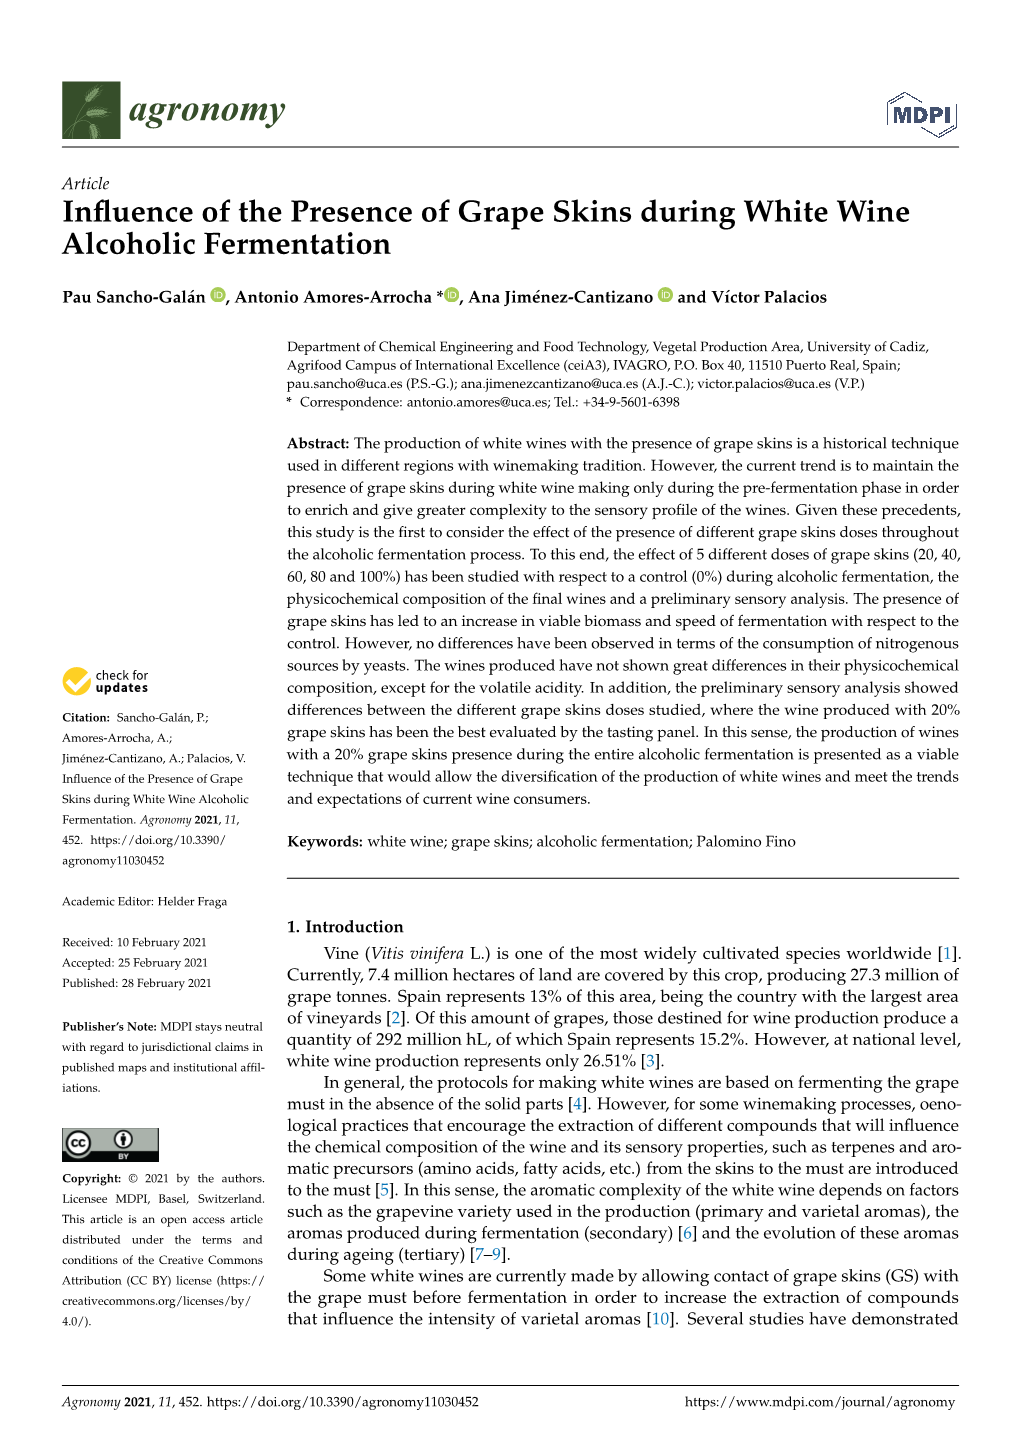 Influence of the Presence of Grape Skins During White Wine Alcoholic Fermentation